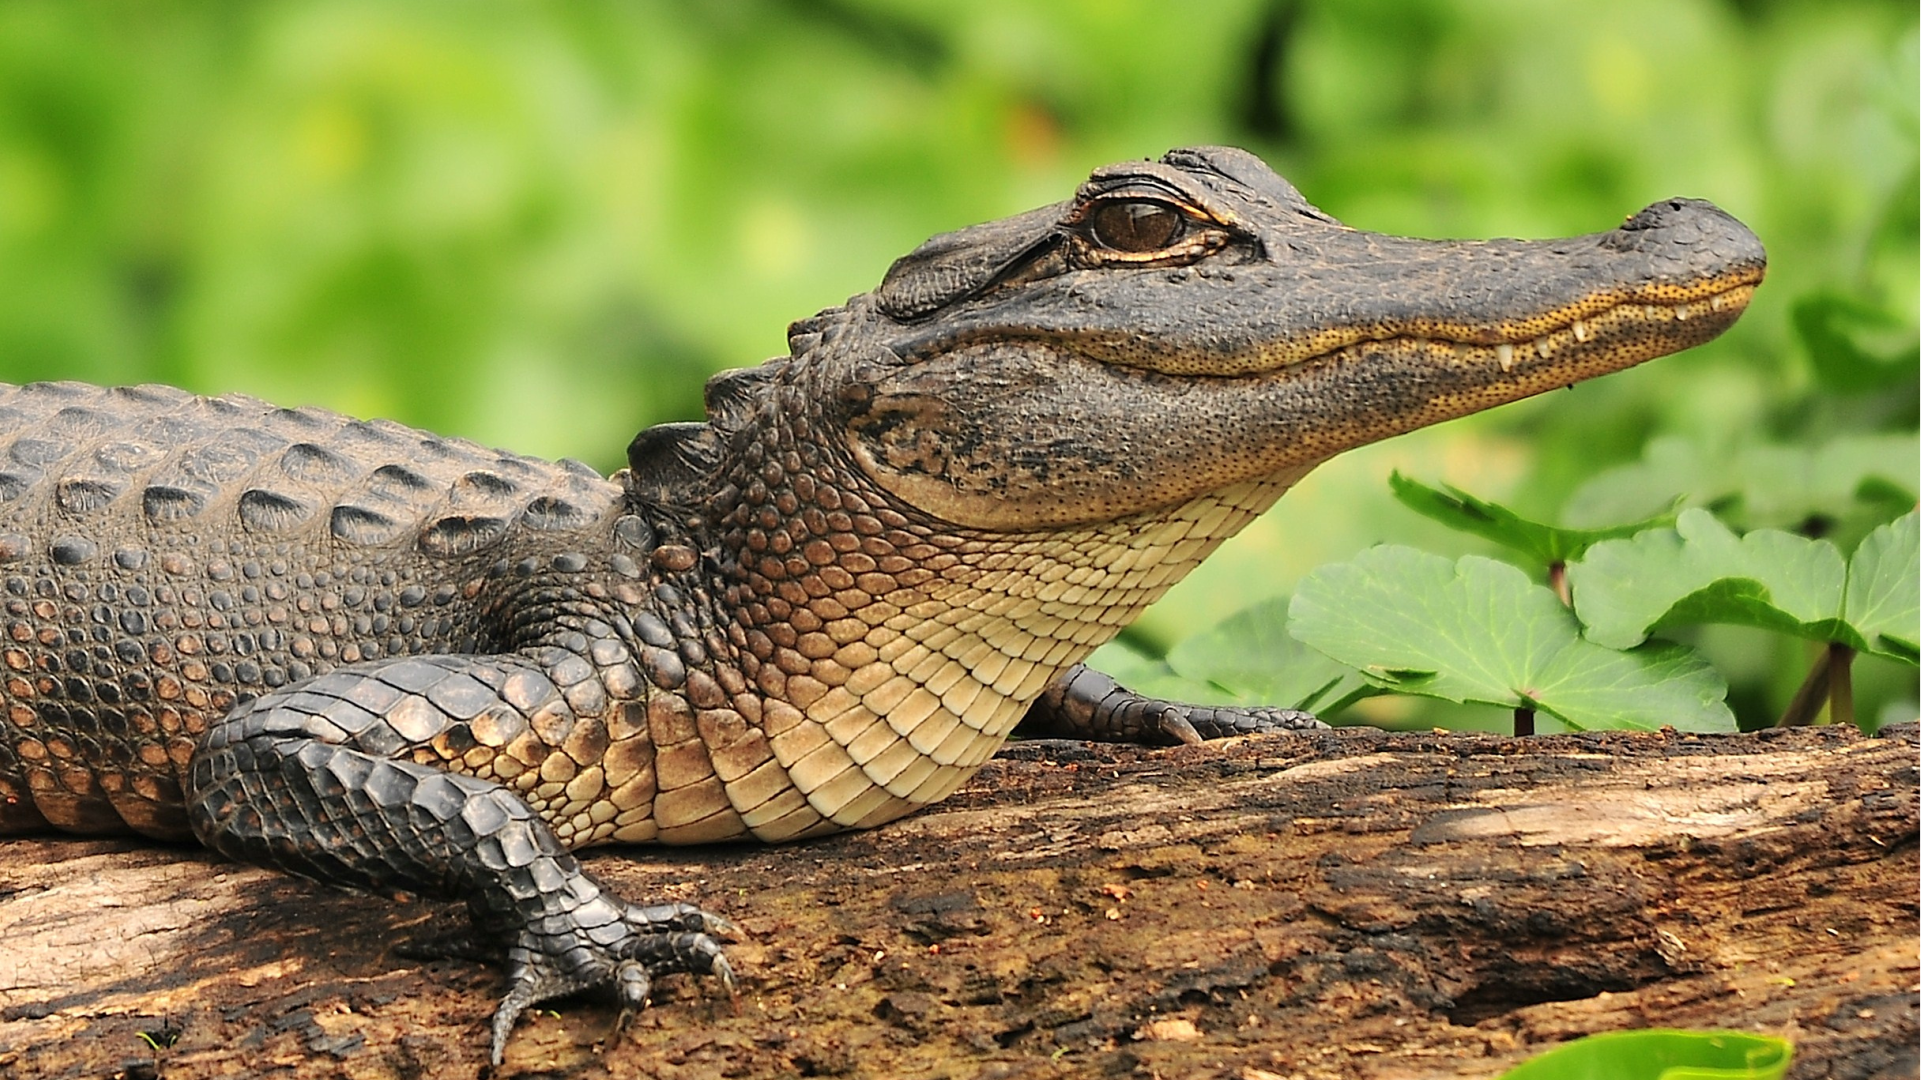 5 Places in Florida to View Alligators in Their Natural Habitat